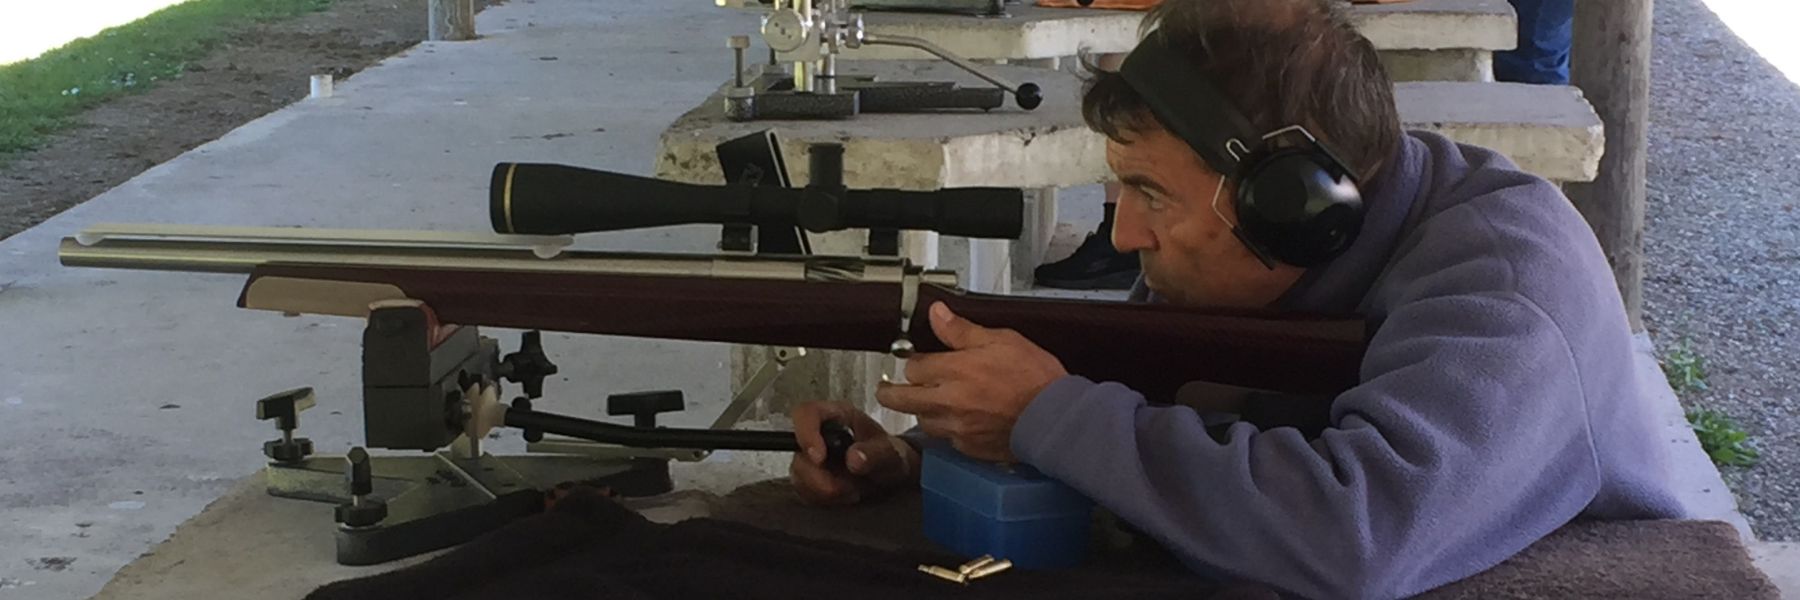 Graeme Smith the father of benchrest shooting